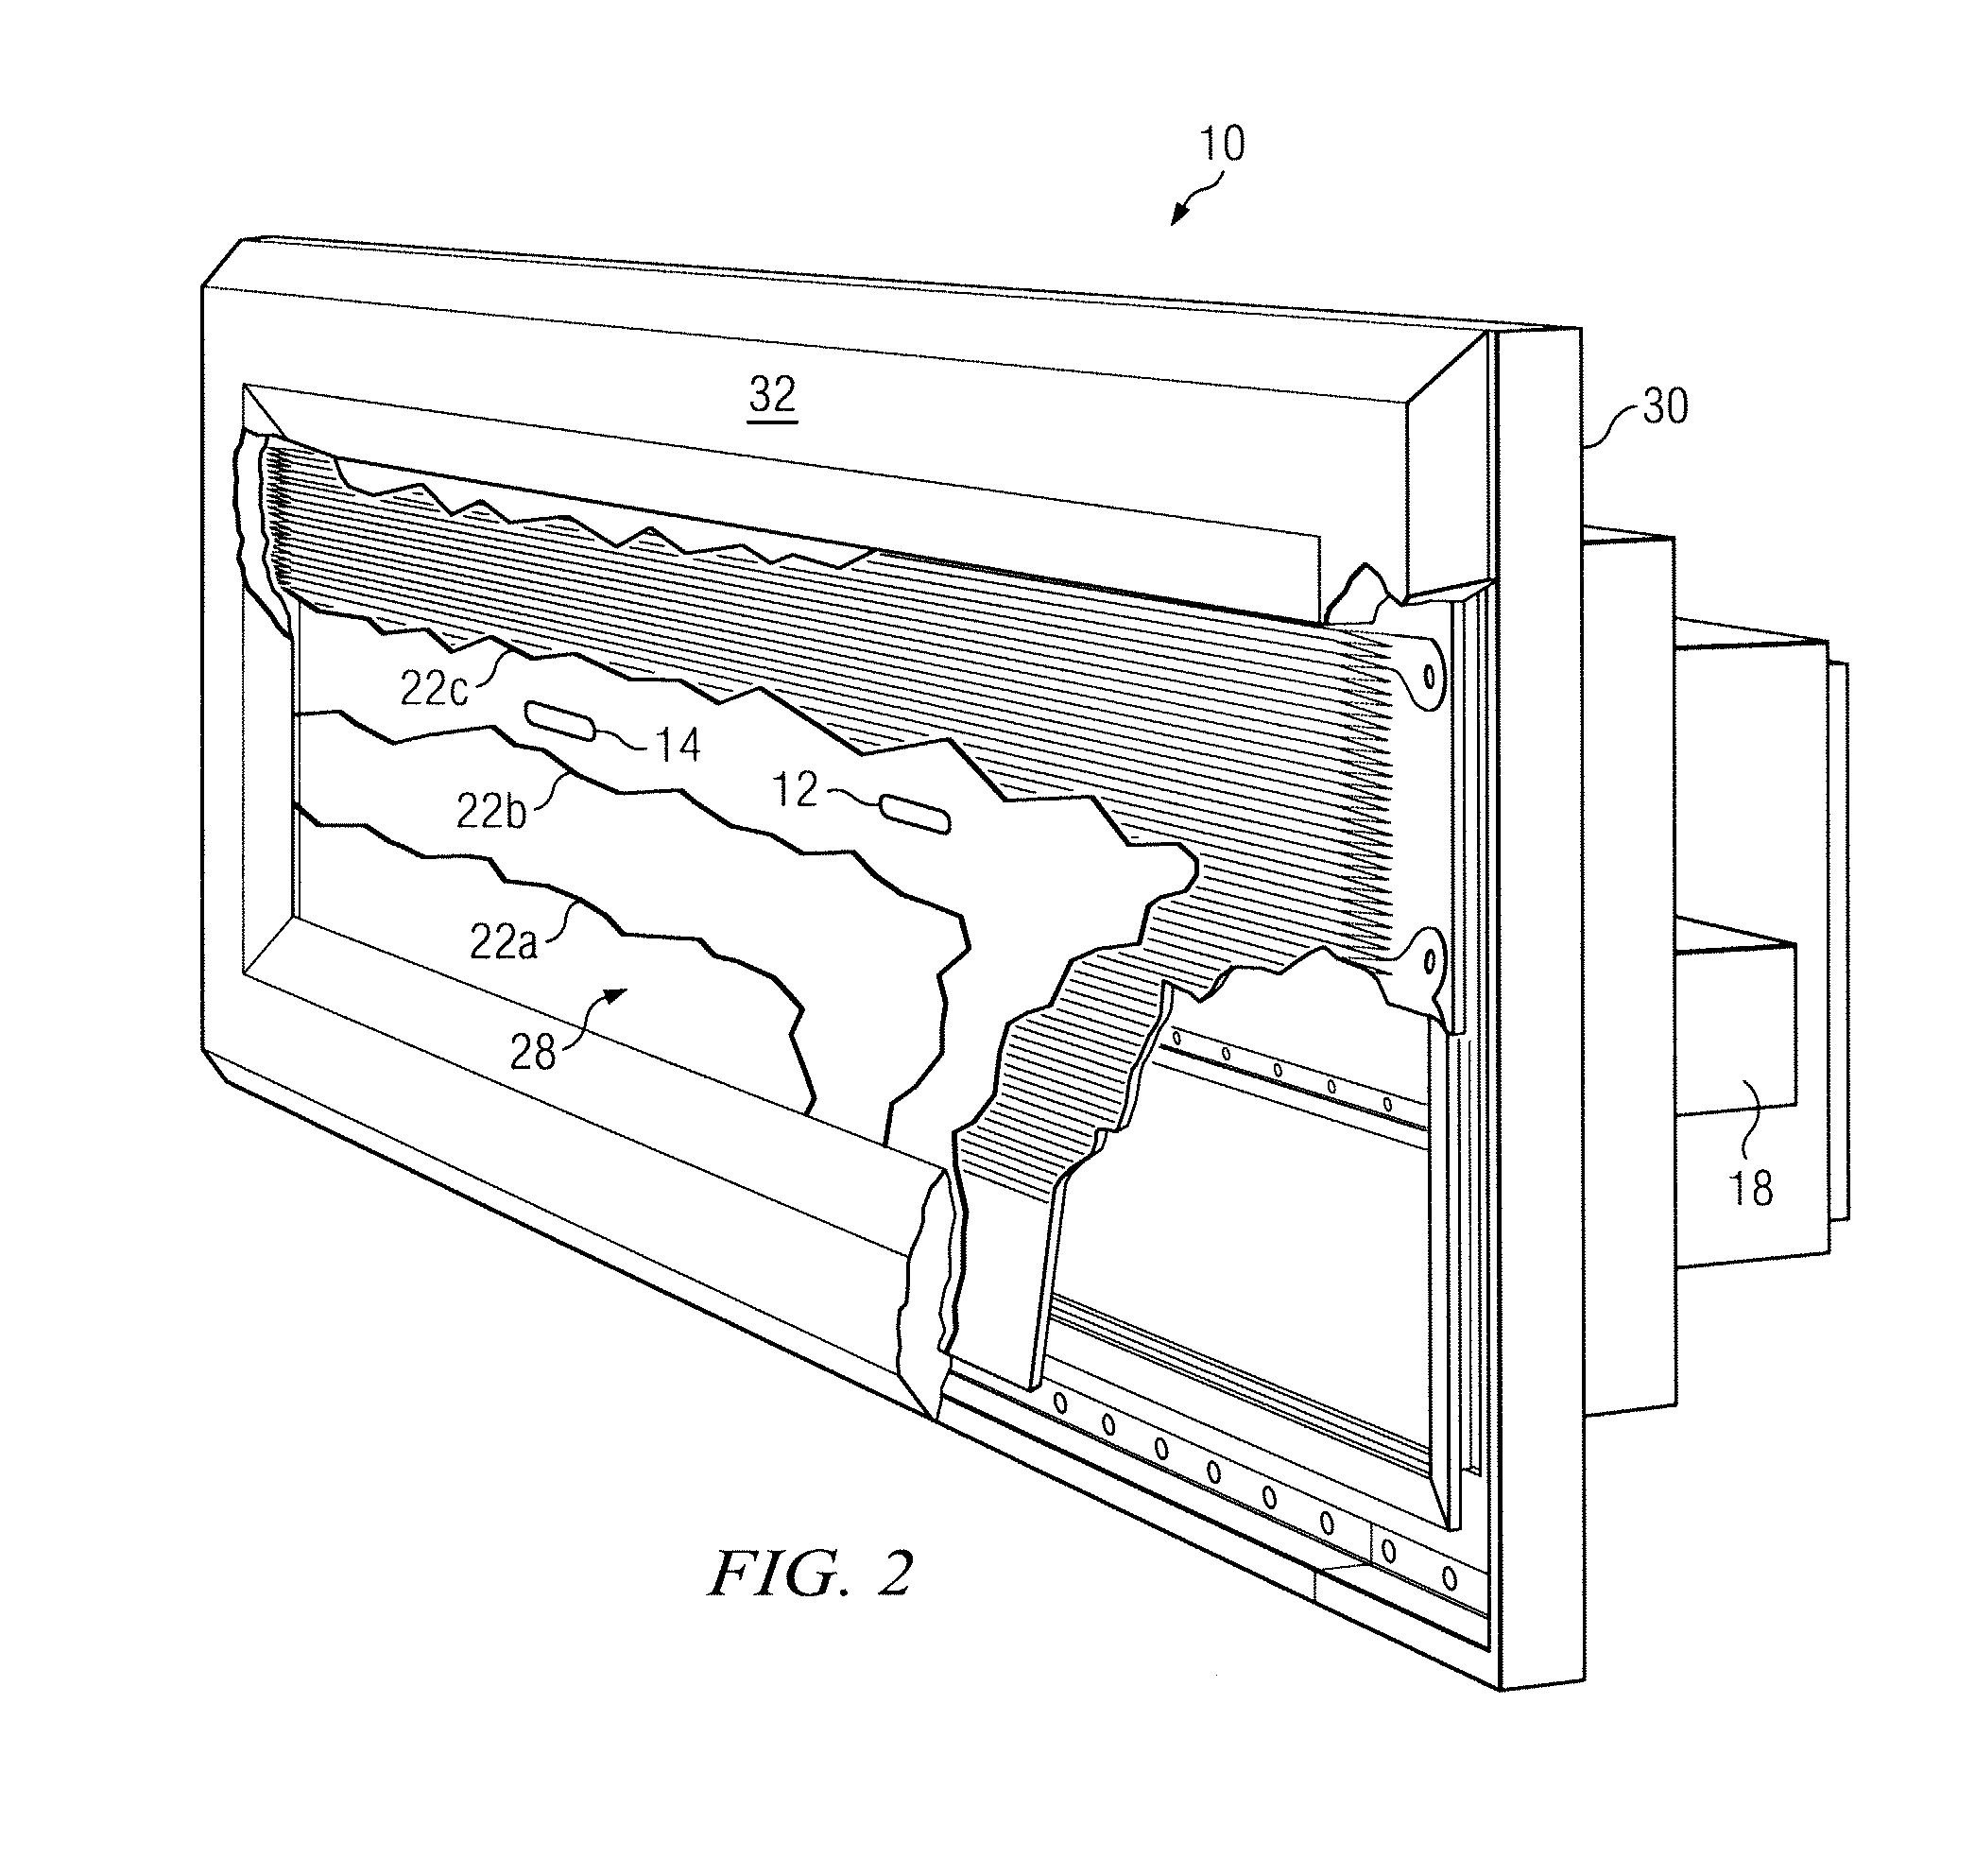 Apparatus for Remotely Measuring Surface Temperature Using Embedded Components